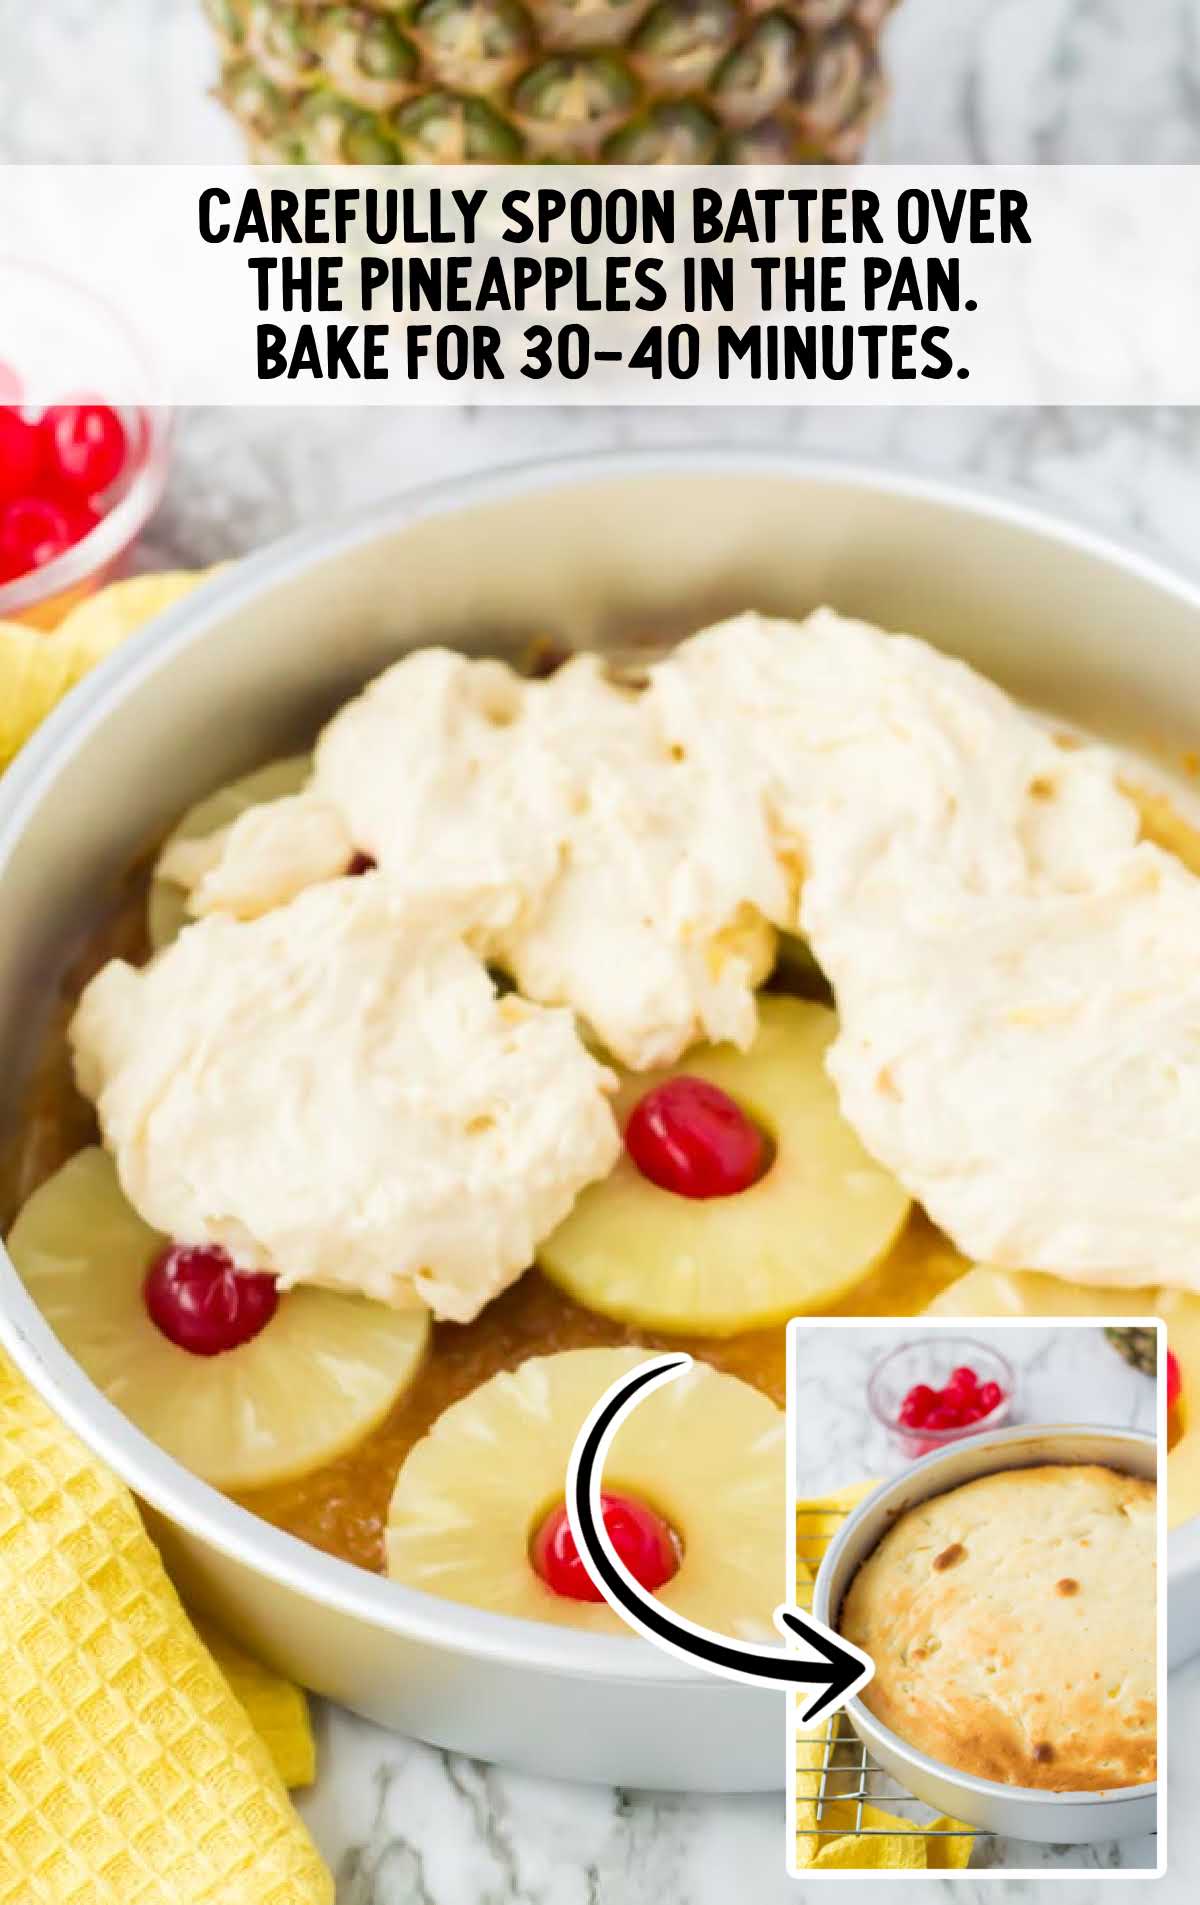 batter spooned over the pineapples in a pan